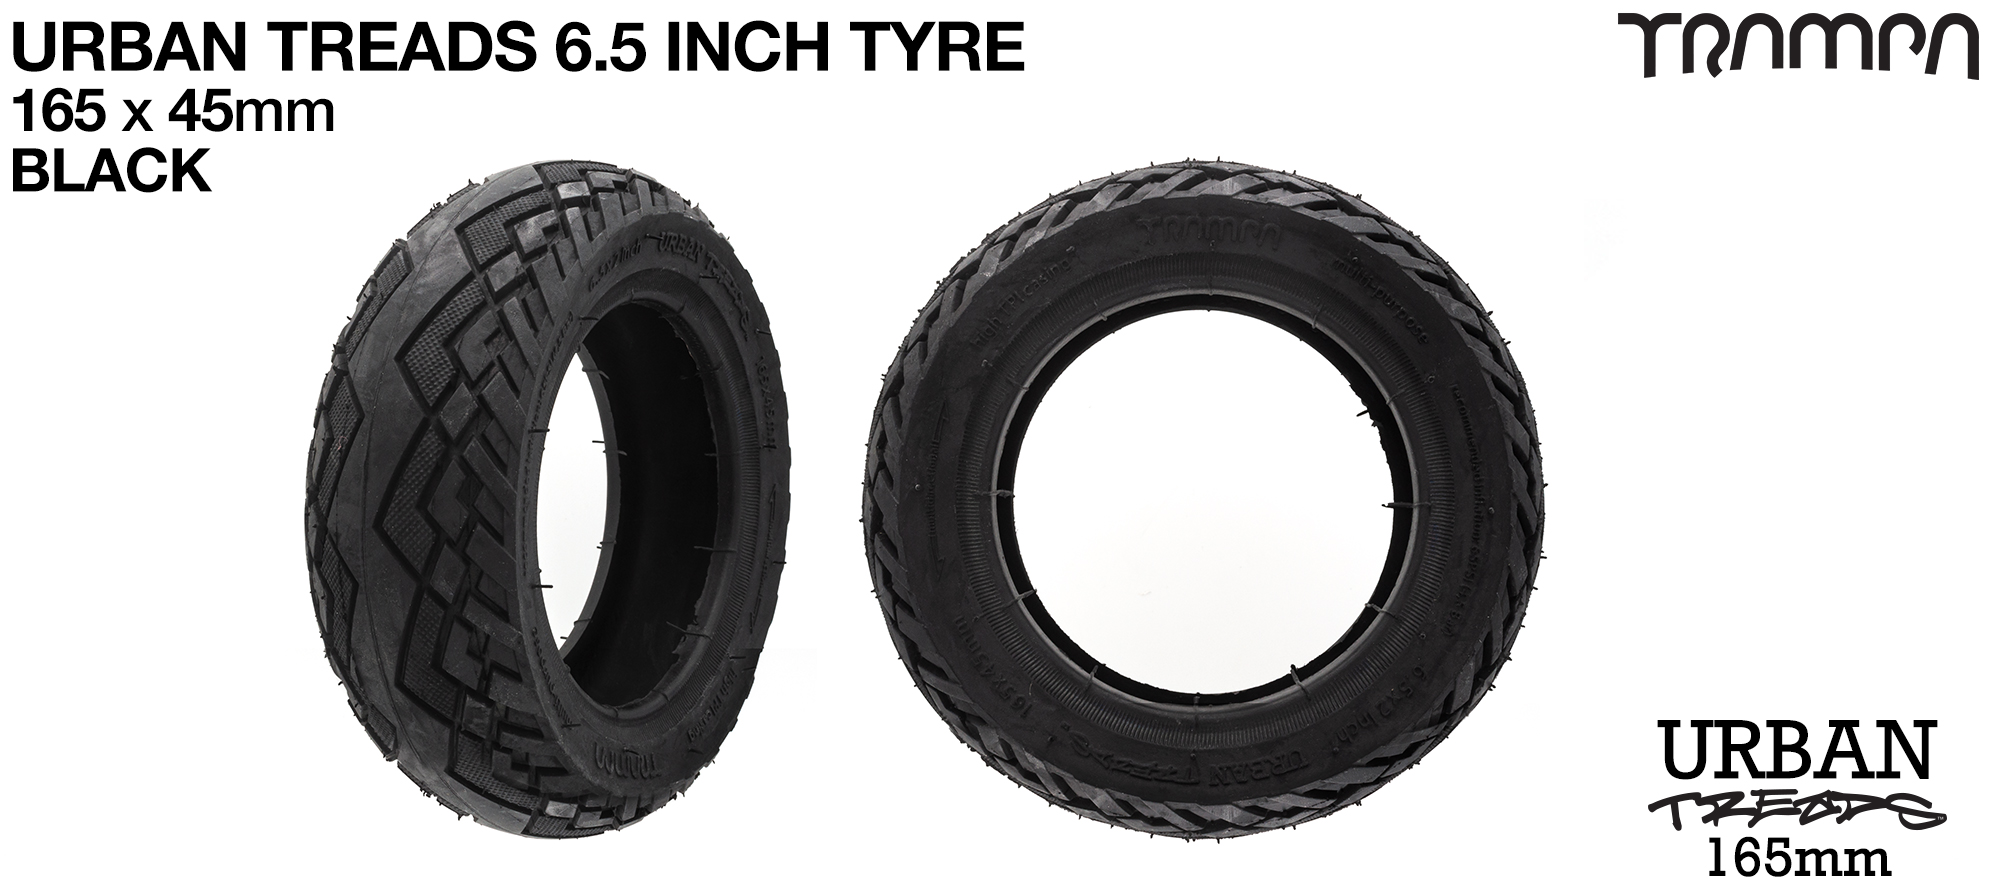 6.5 Inch Tyre TRAMPA URBAN TREADS is the perfect all round tyre for Urban & City riding - BLACK